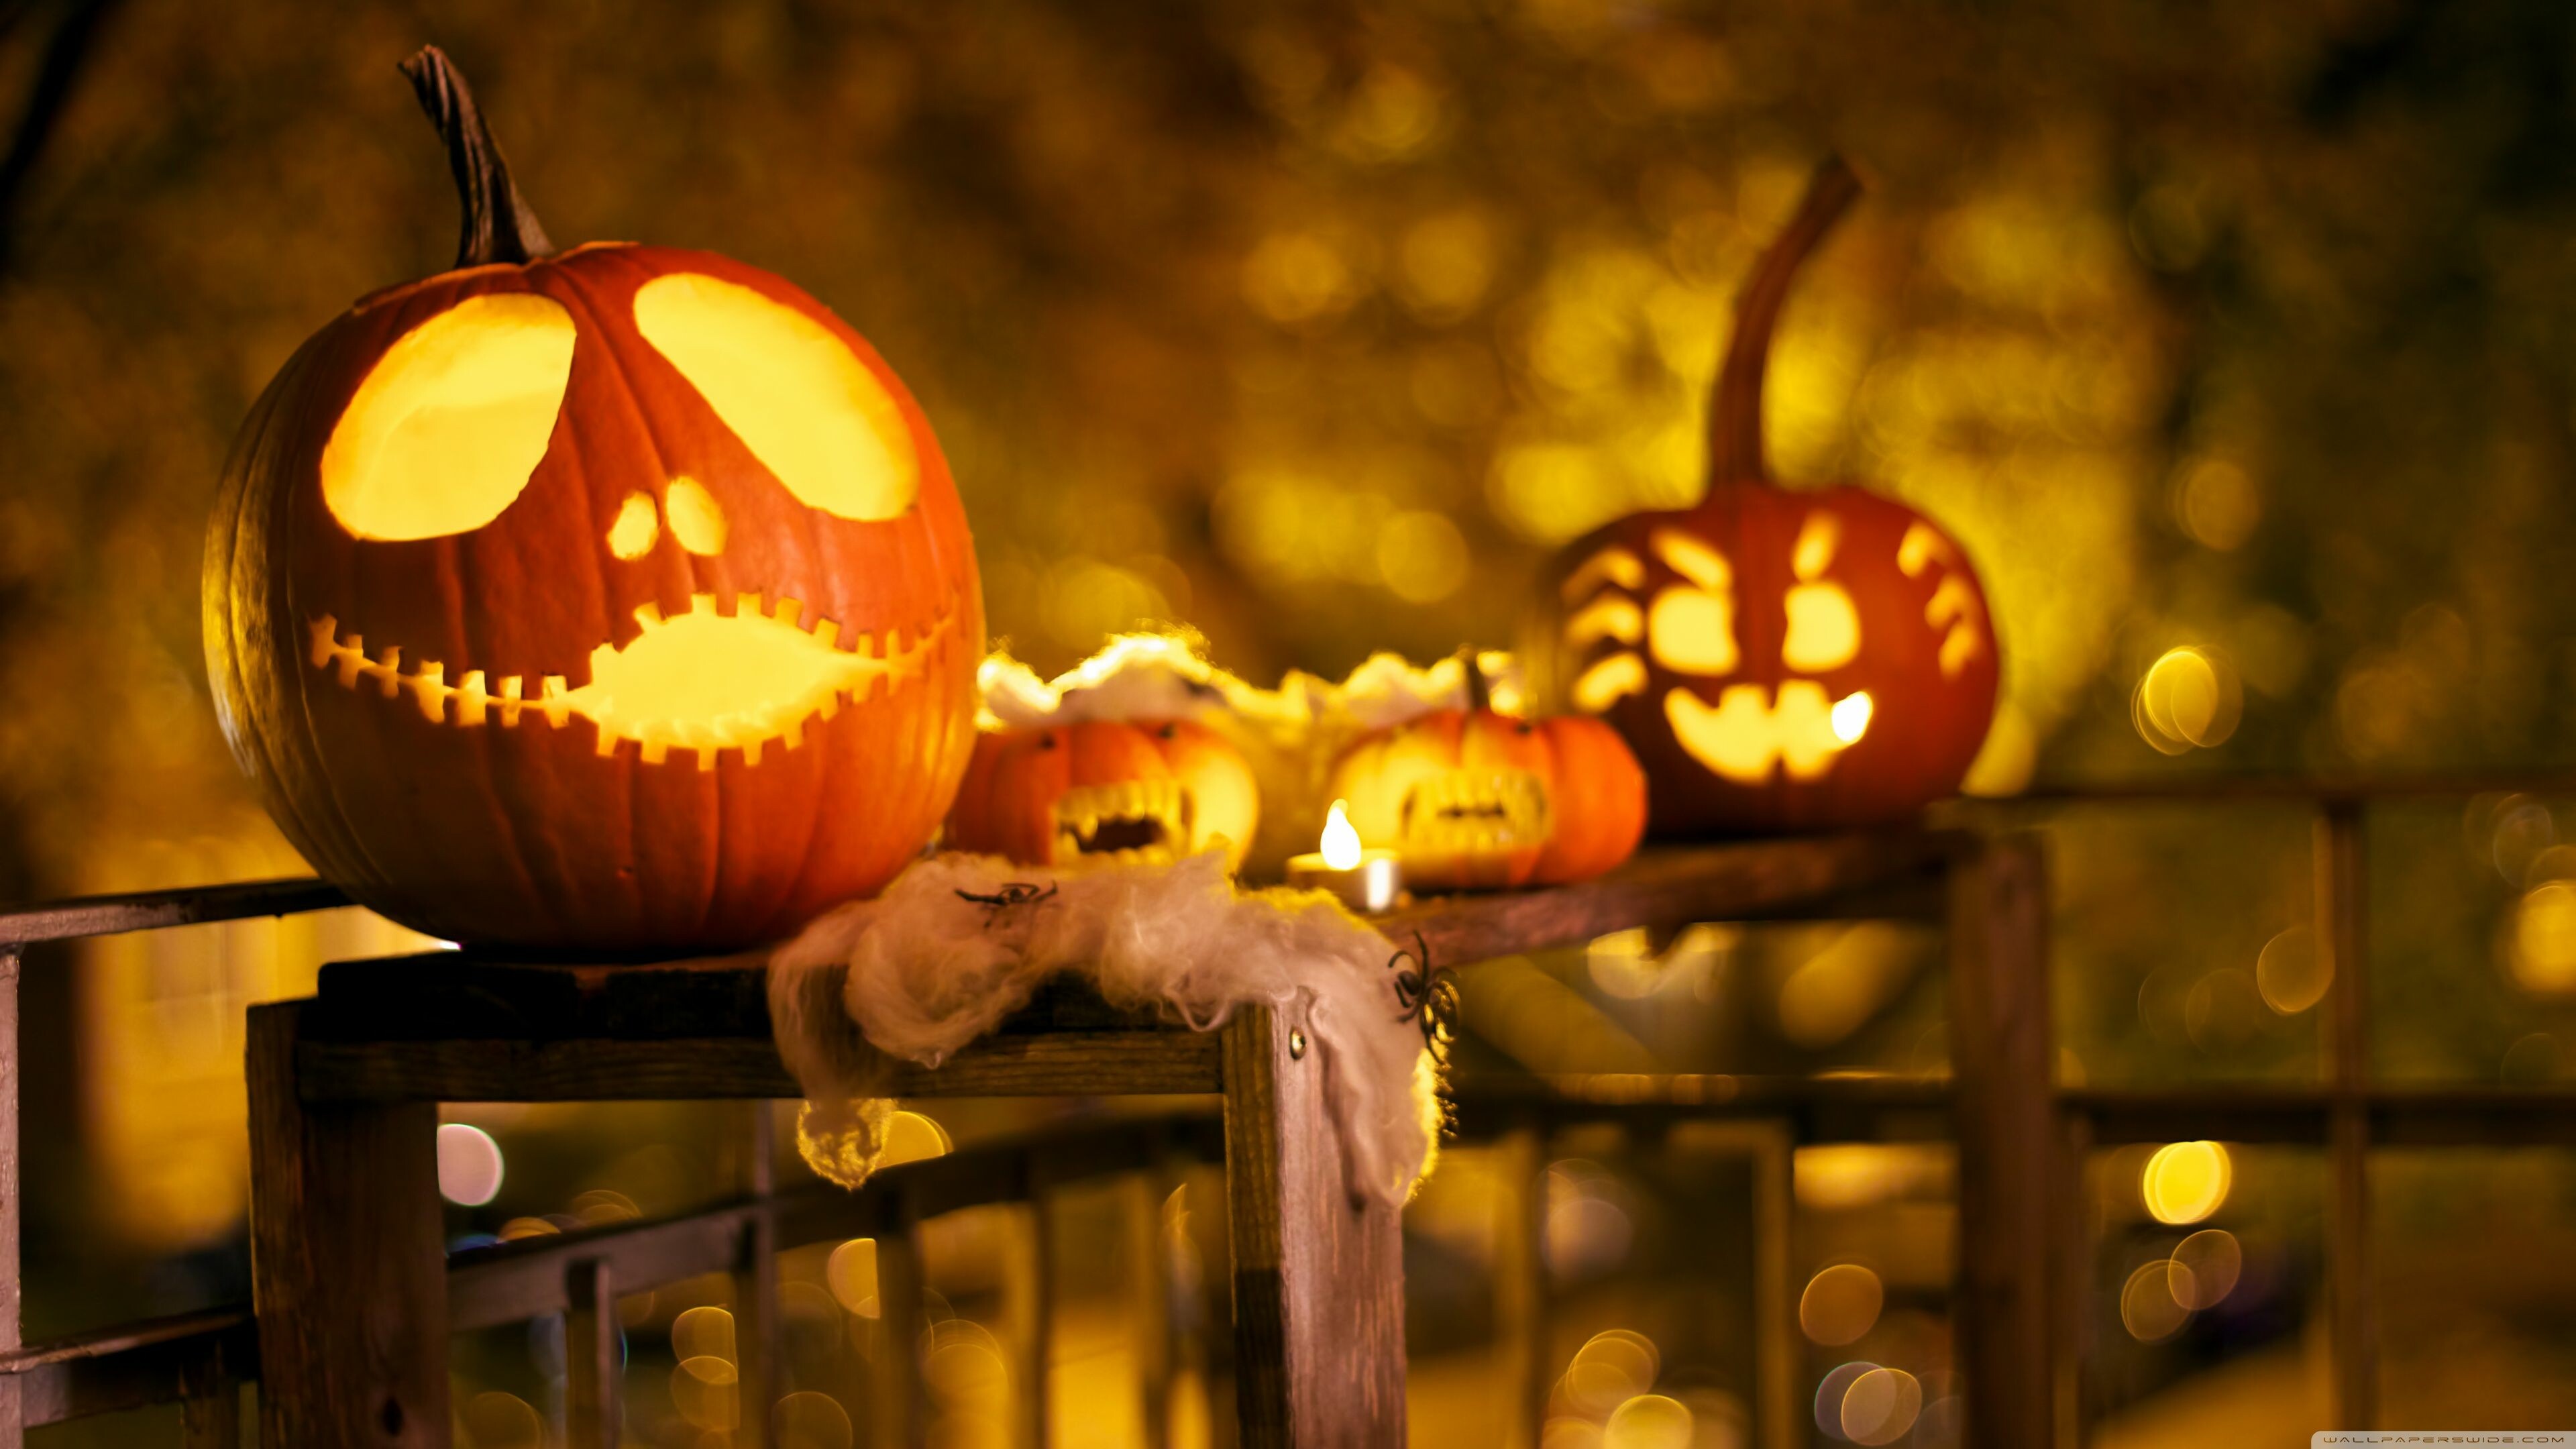 Decorations: Halloween, The things used to beautify environment, Pumpkin. 3840x2160 4K Wallpaper.